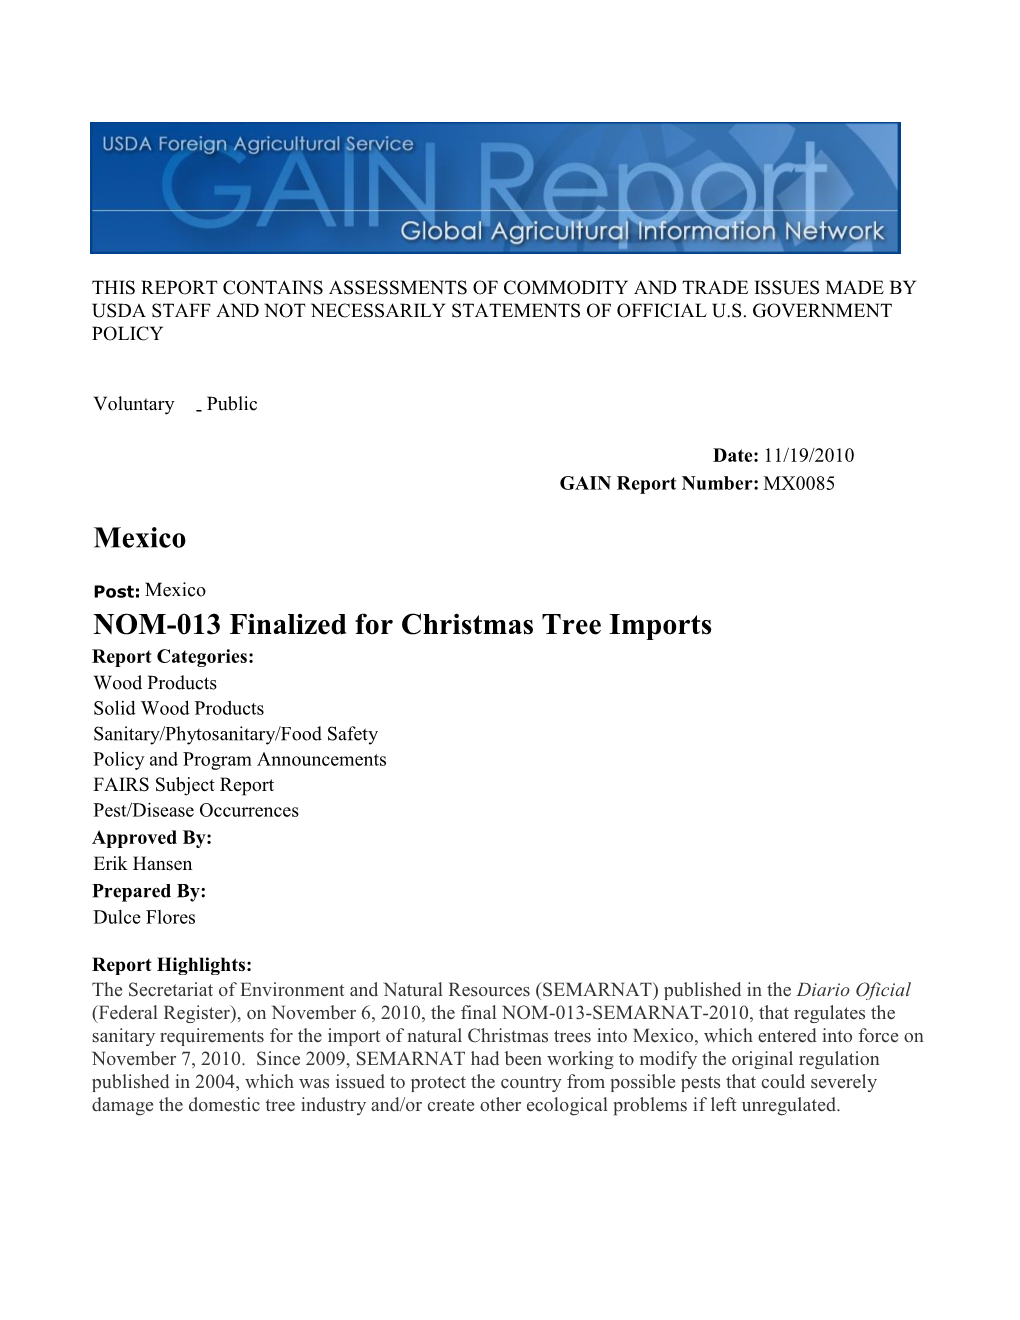 NOM-013 Finalized for Christmas Tree Imports Mexico